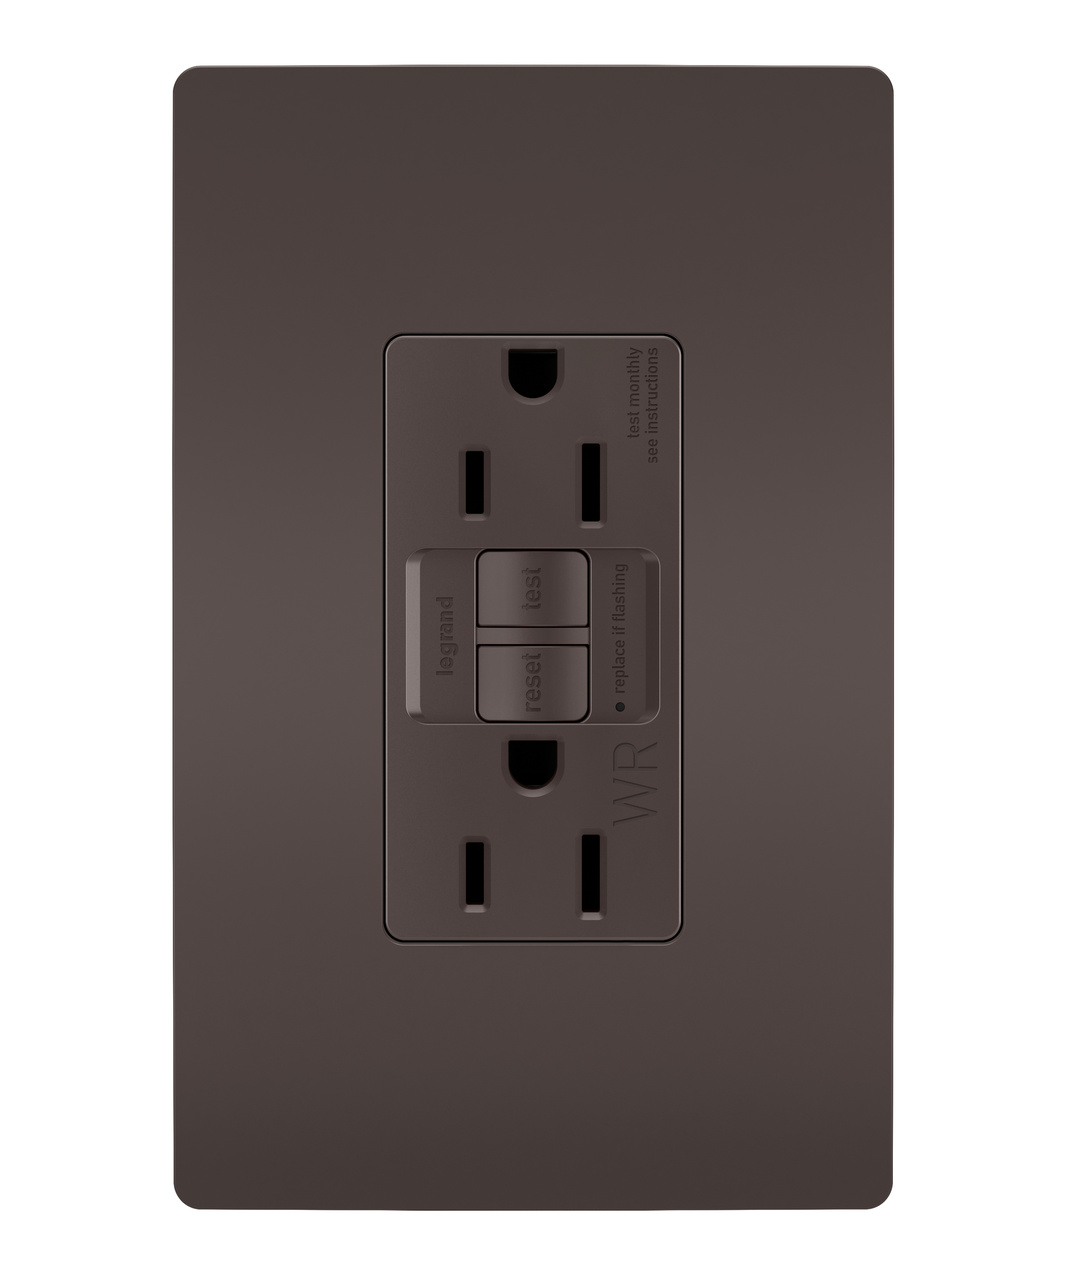 15A 20A A GFI GFCI WALL RECEPTACLE BROWN BLACK GRAY ALMOND IVORY WHITE LED LIGHT